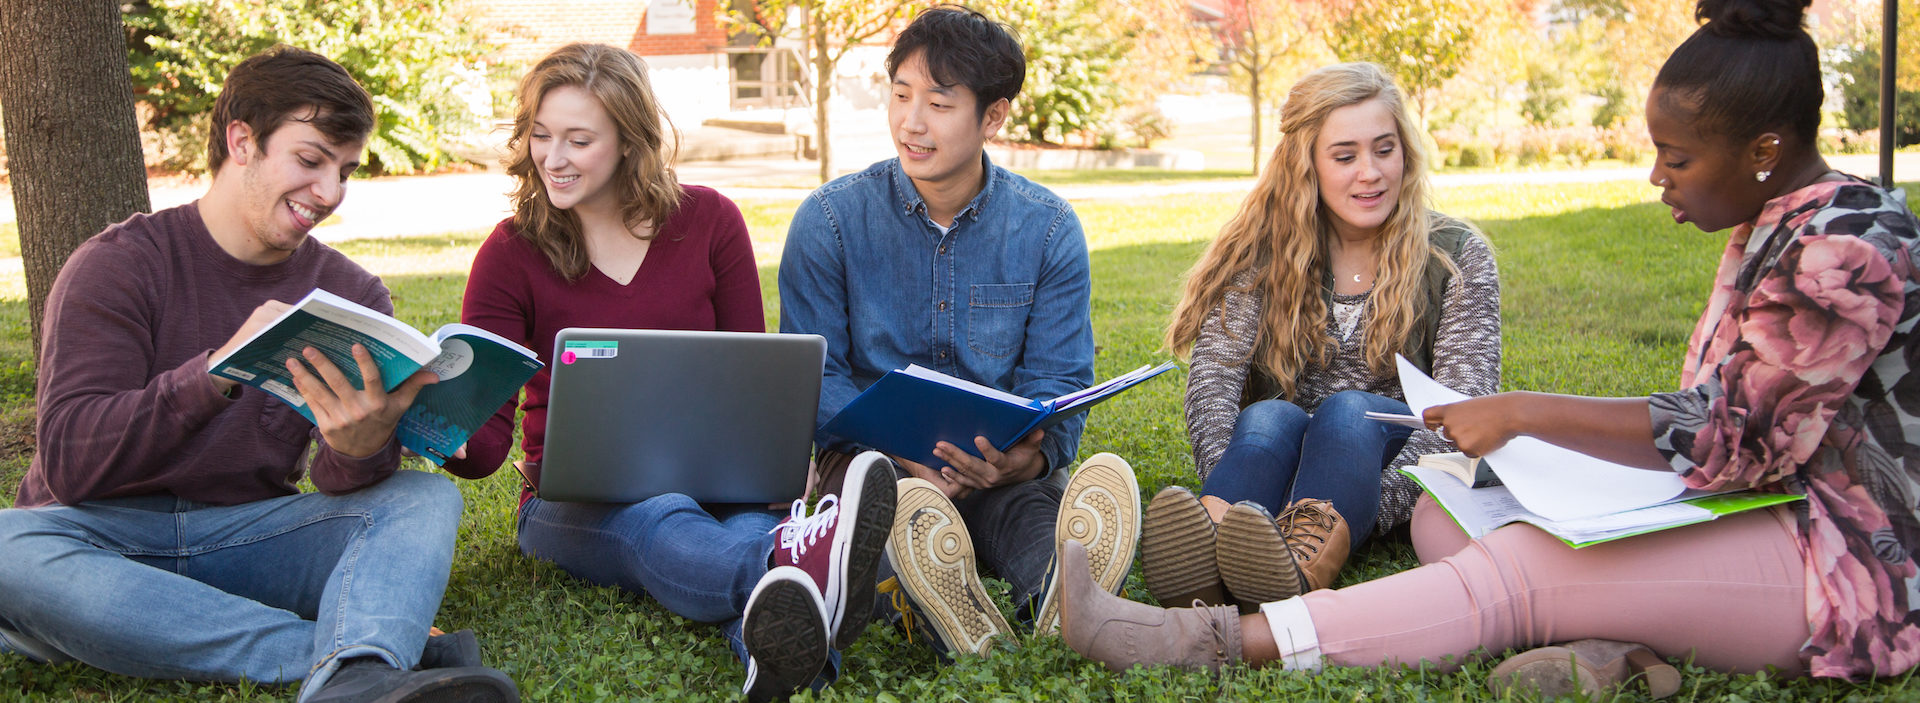 Diverse group of students study together outdoors.